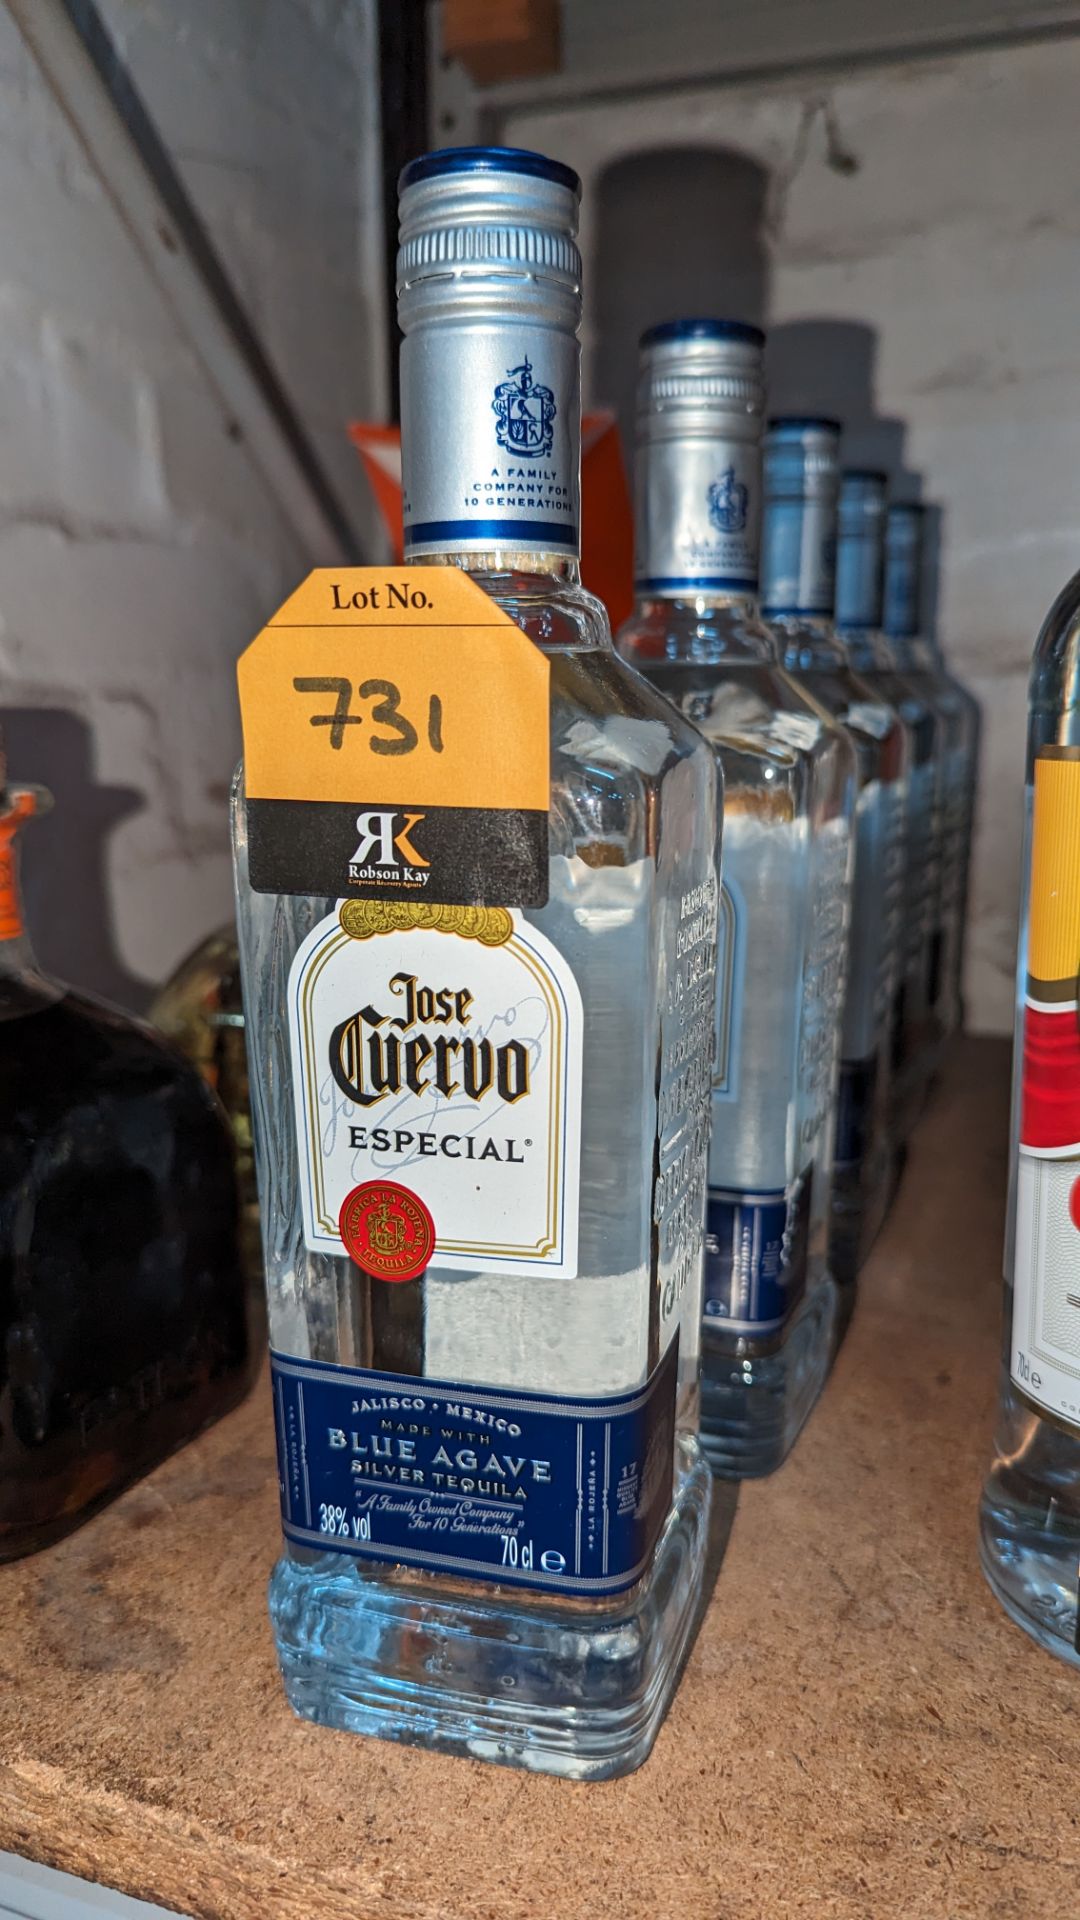 5 bottles of Jose Cuervo Especial blue agave silver tequila (70cl) sold under AWRS number XQAW000001 - Image 2 of 3